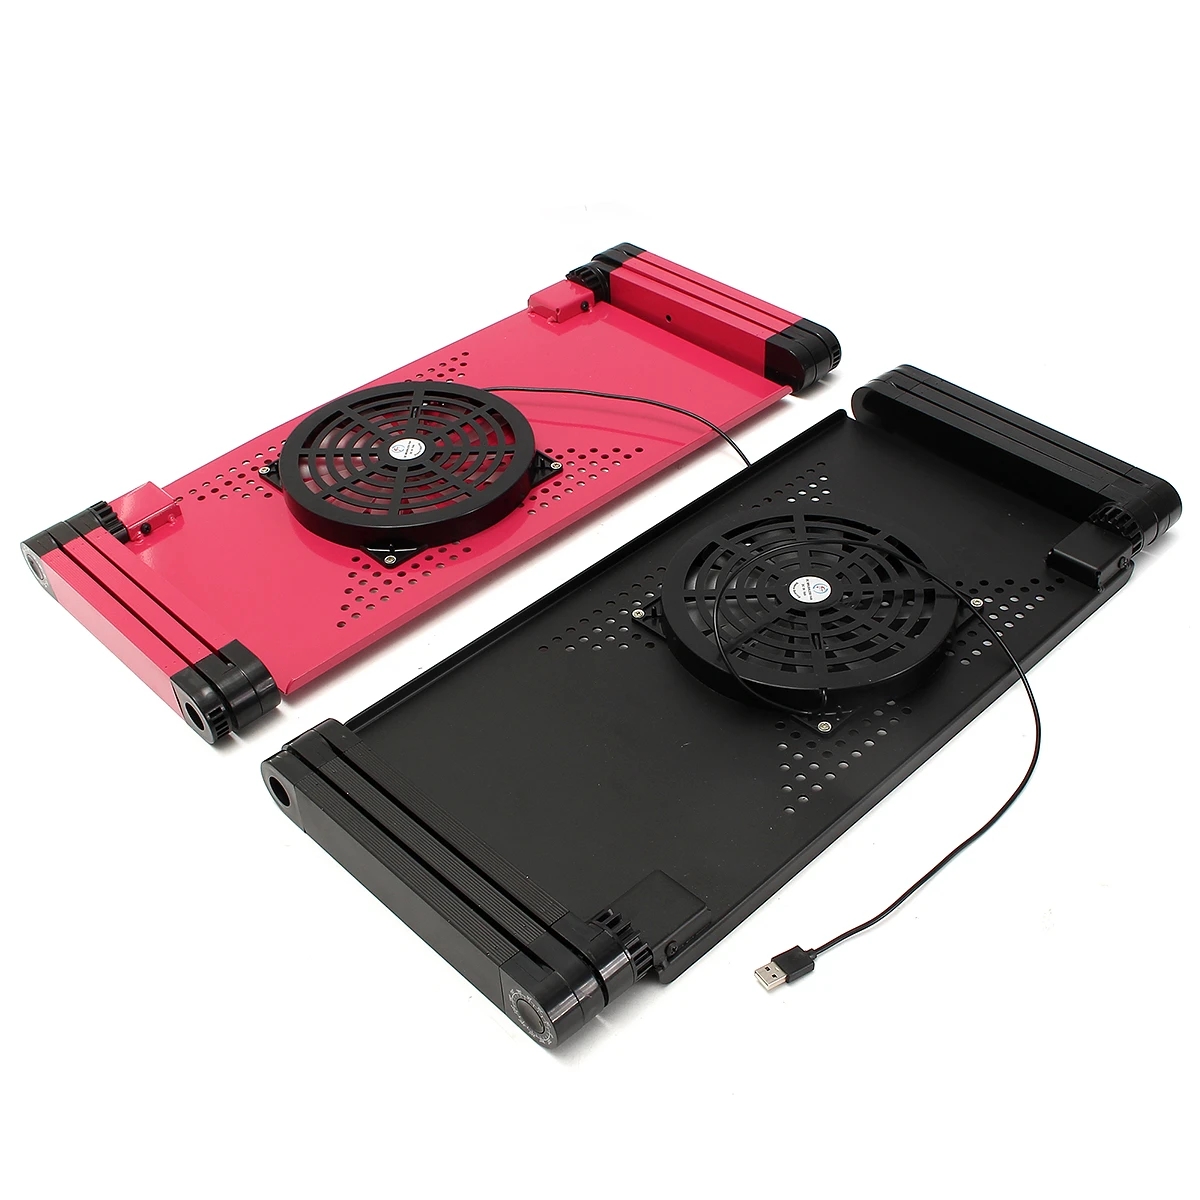 Find Adjustable Laptop Desk Laptop stand Portable Foldable Stand Bed Tray Laptop with Cooling Fan for up to 17 Inches for Sale on Gipsybee.com with cryptocurrencies